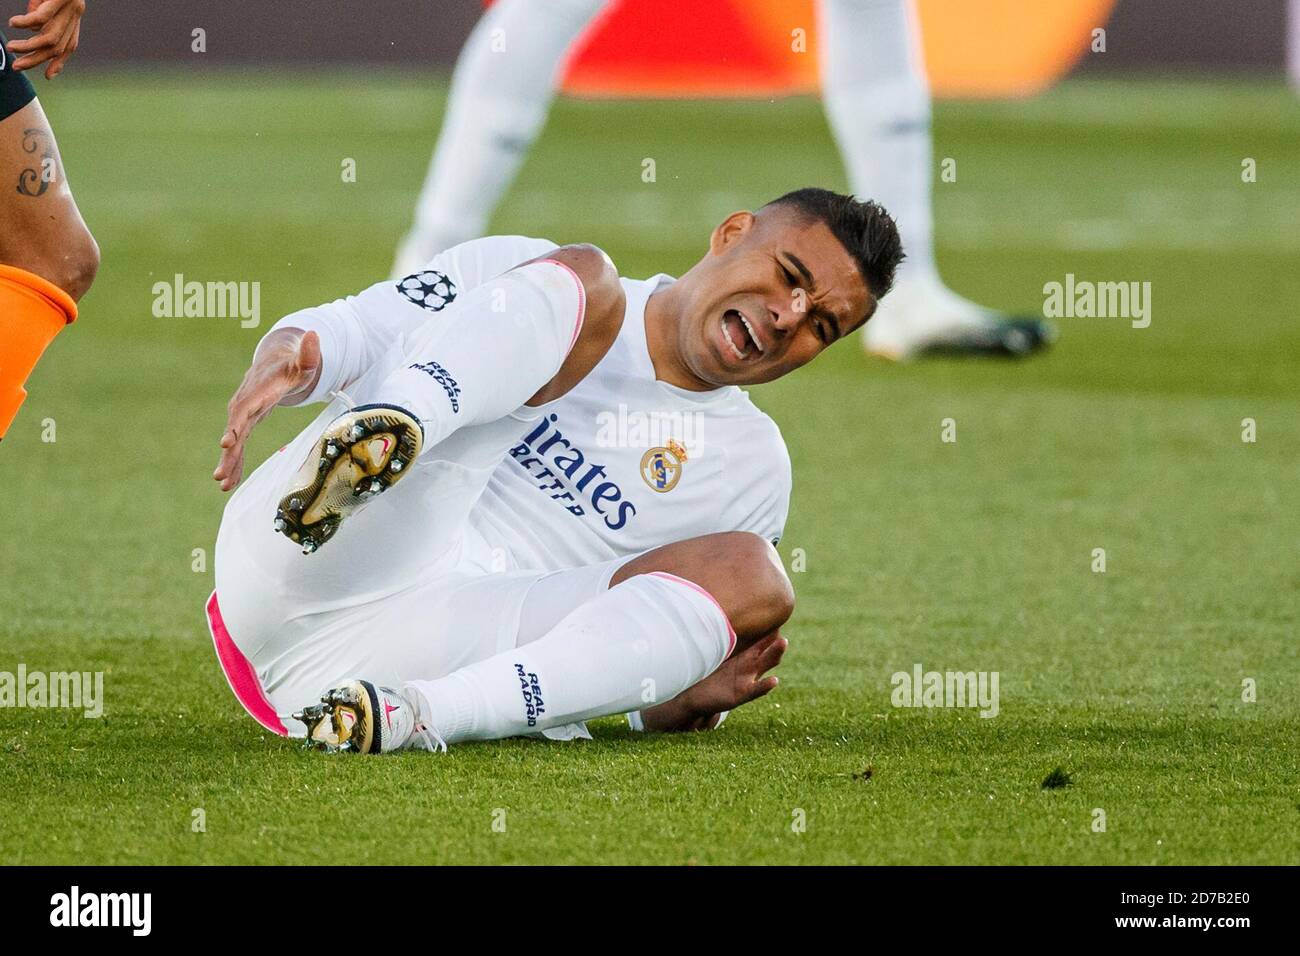 Madrid, Spain. 21st Oct, 2020. Casemiro of Real Madrid during the UEFA Champions League match between Real Madrid and FC Shakhtar Donetsk at at Estadio Alfredo Di Stefano on October 21, 2020 in Madrid, Spain. Credit: Dax Images/Alamy Live News Stock Photo